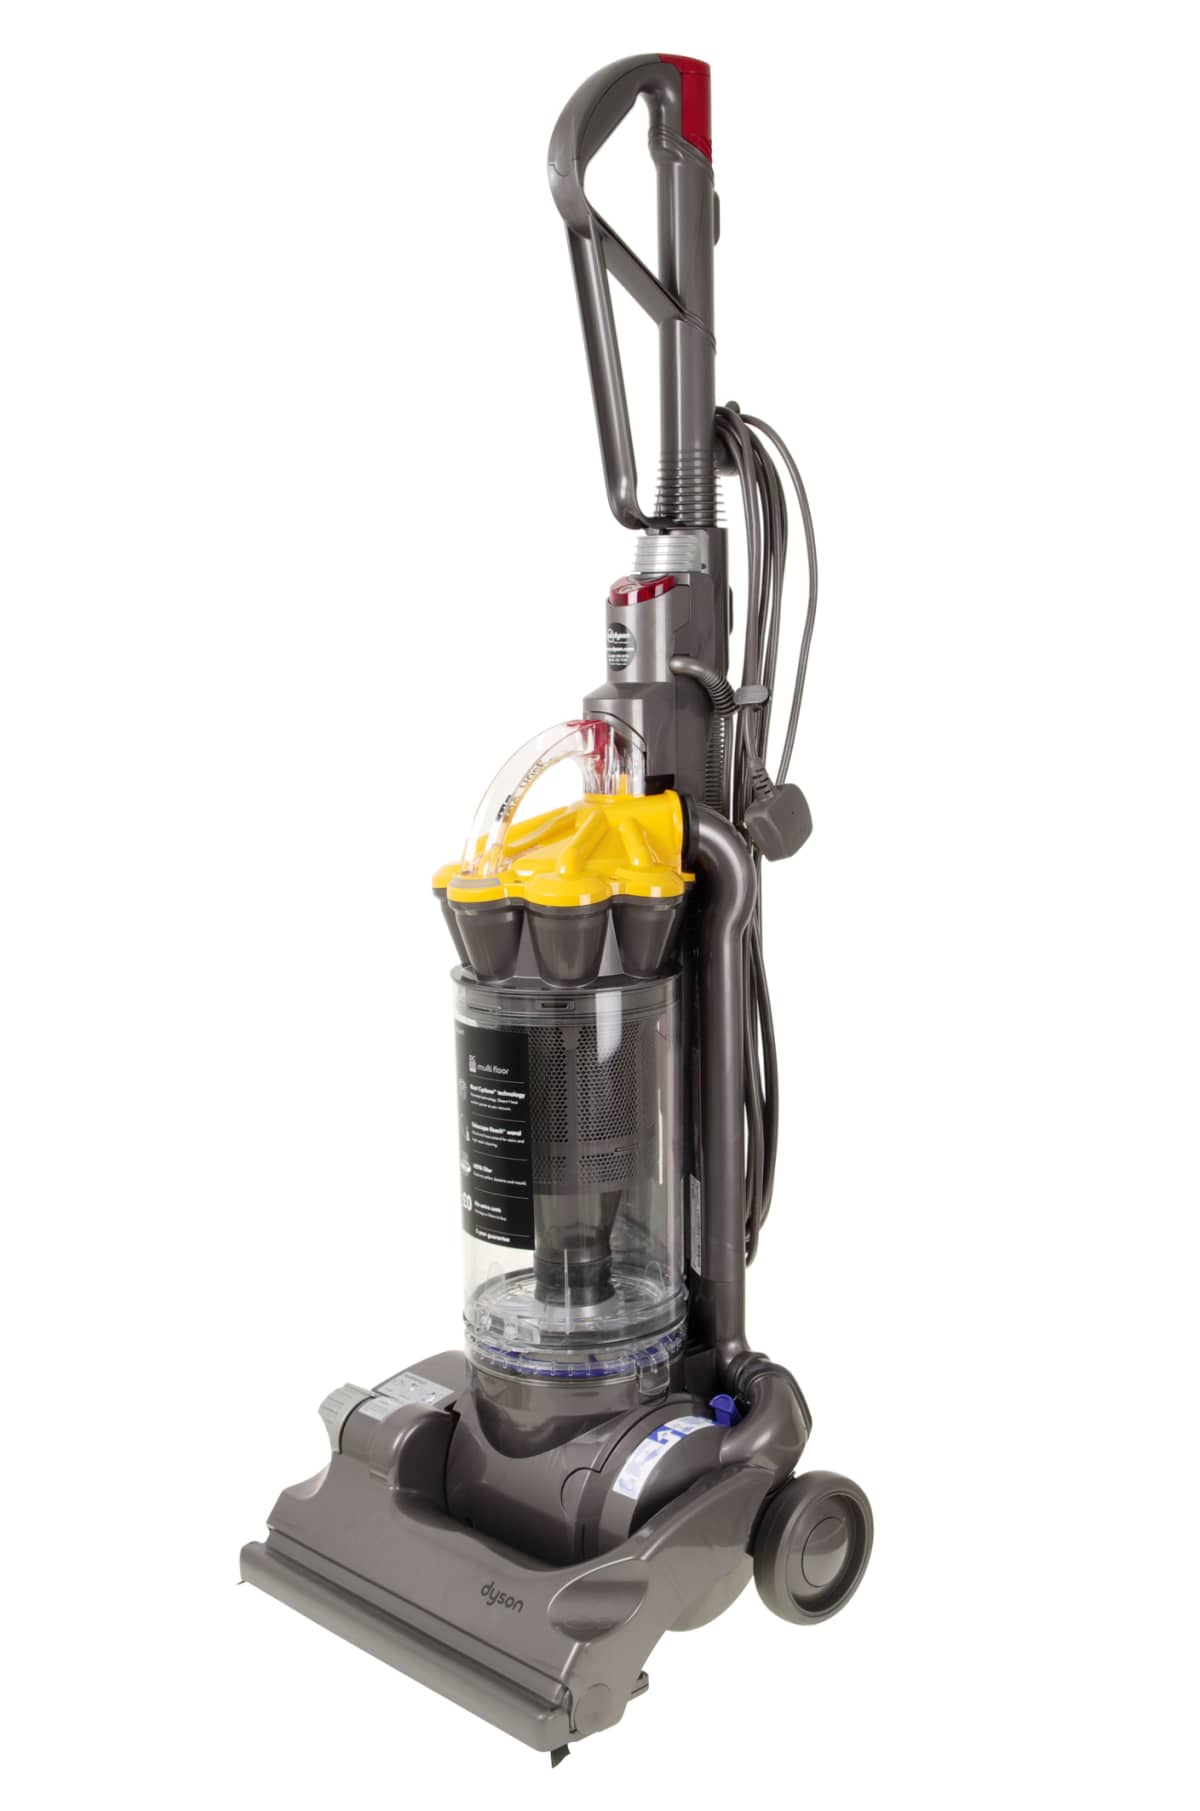 "Helston, Cornwall, UK - August 17, 2012: A Dyson DC33 bagless upright vacuum cleaner. This is the Multi Floor version denoted by the yellow top. This is a product of Dyson Ltd. An innovative British company."